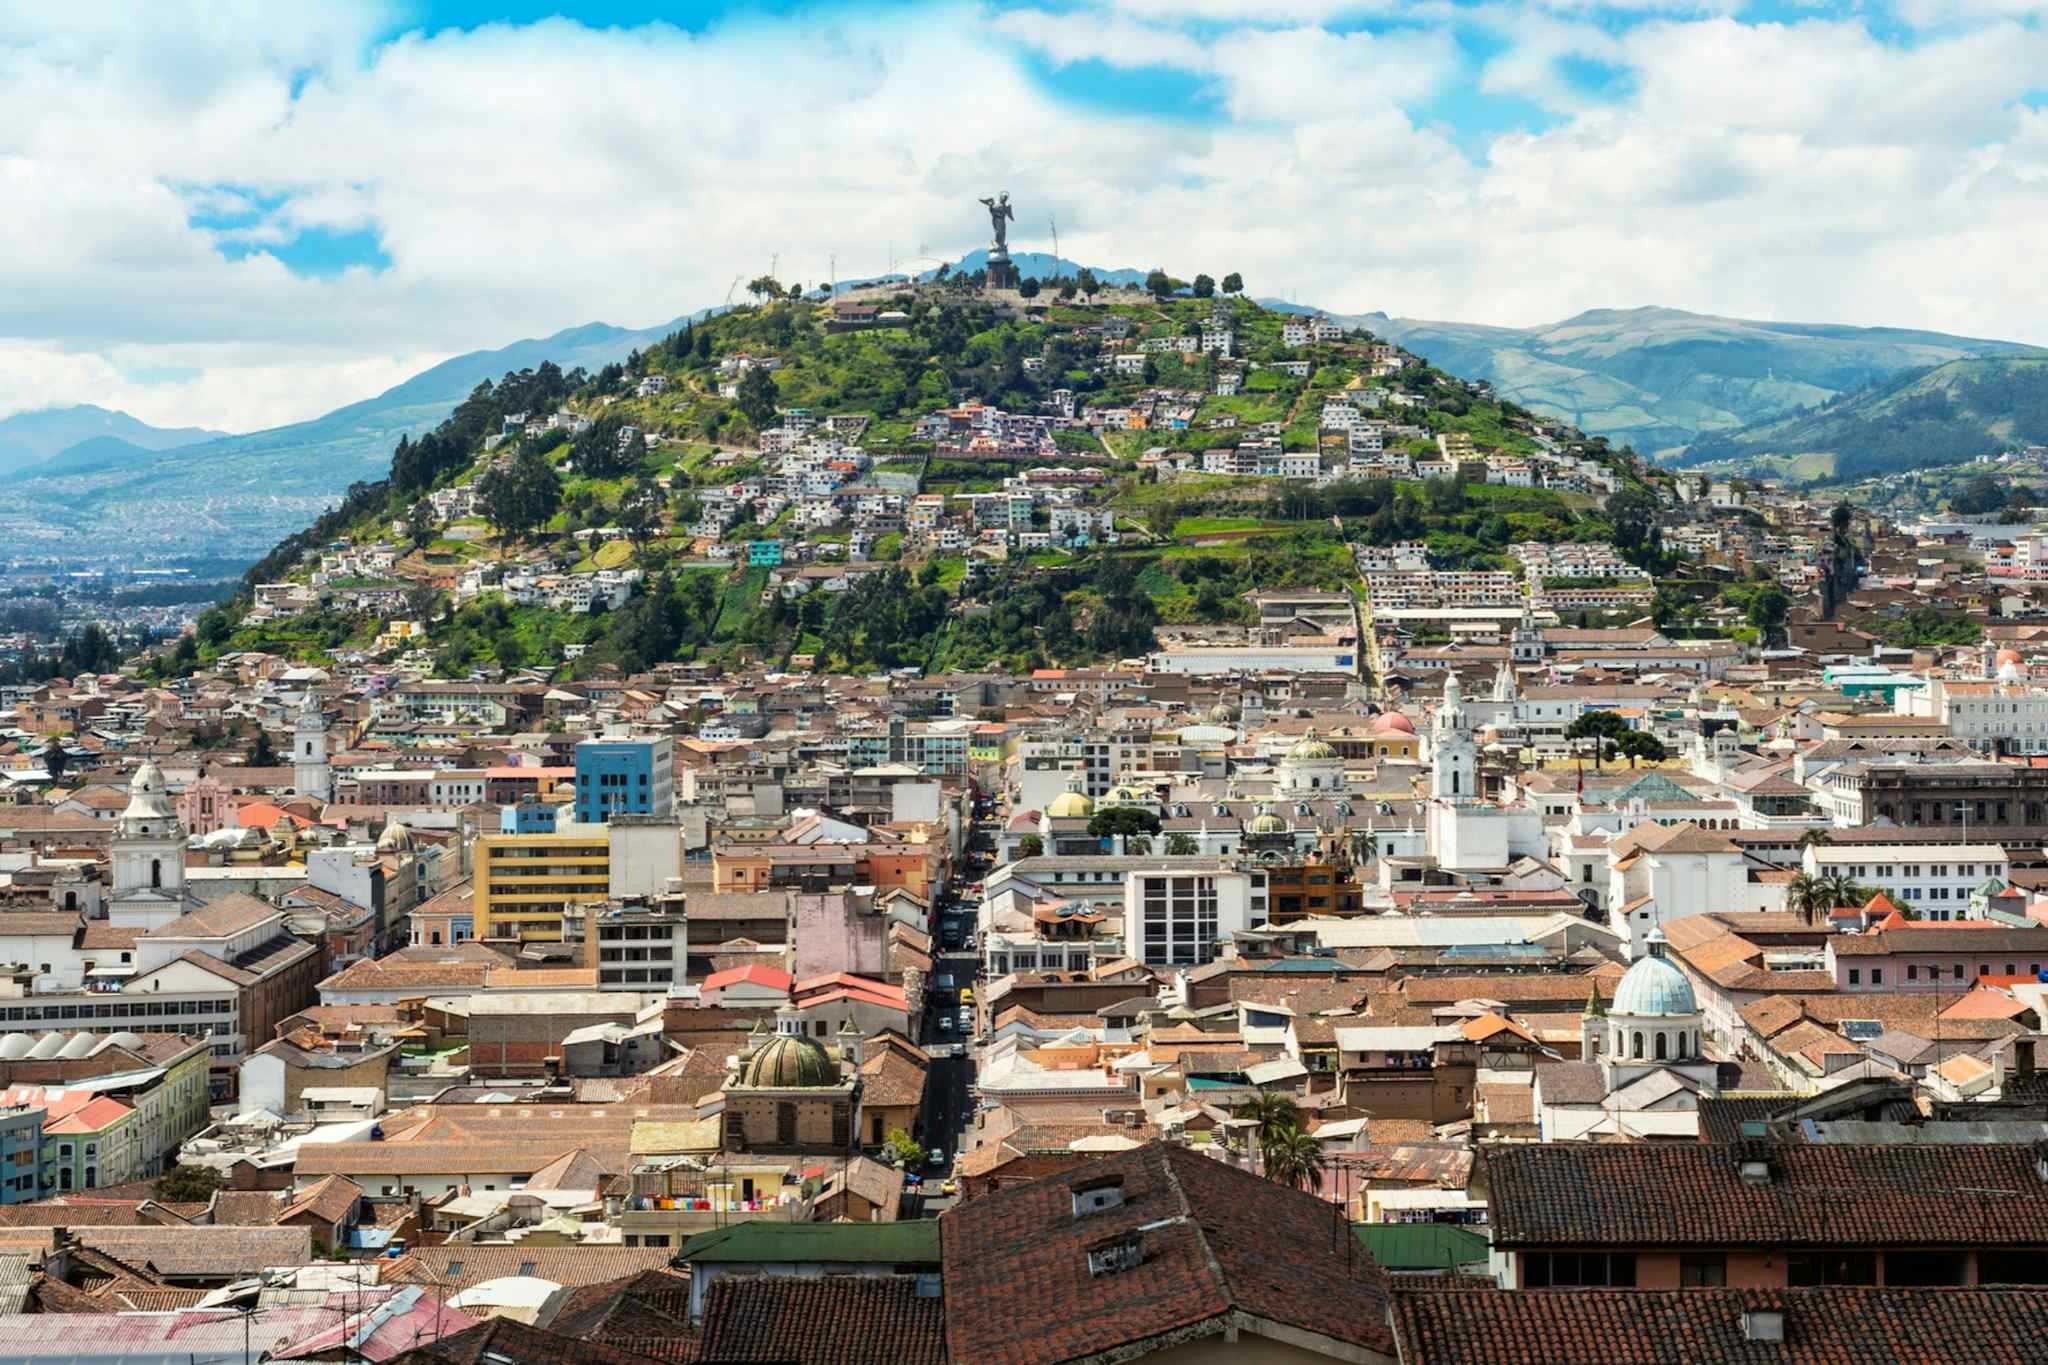 A city scape of Quito with the Virgen de El Panecillo statue standing proud in the background. 